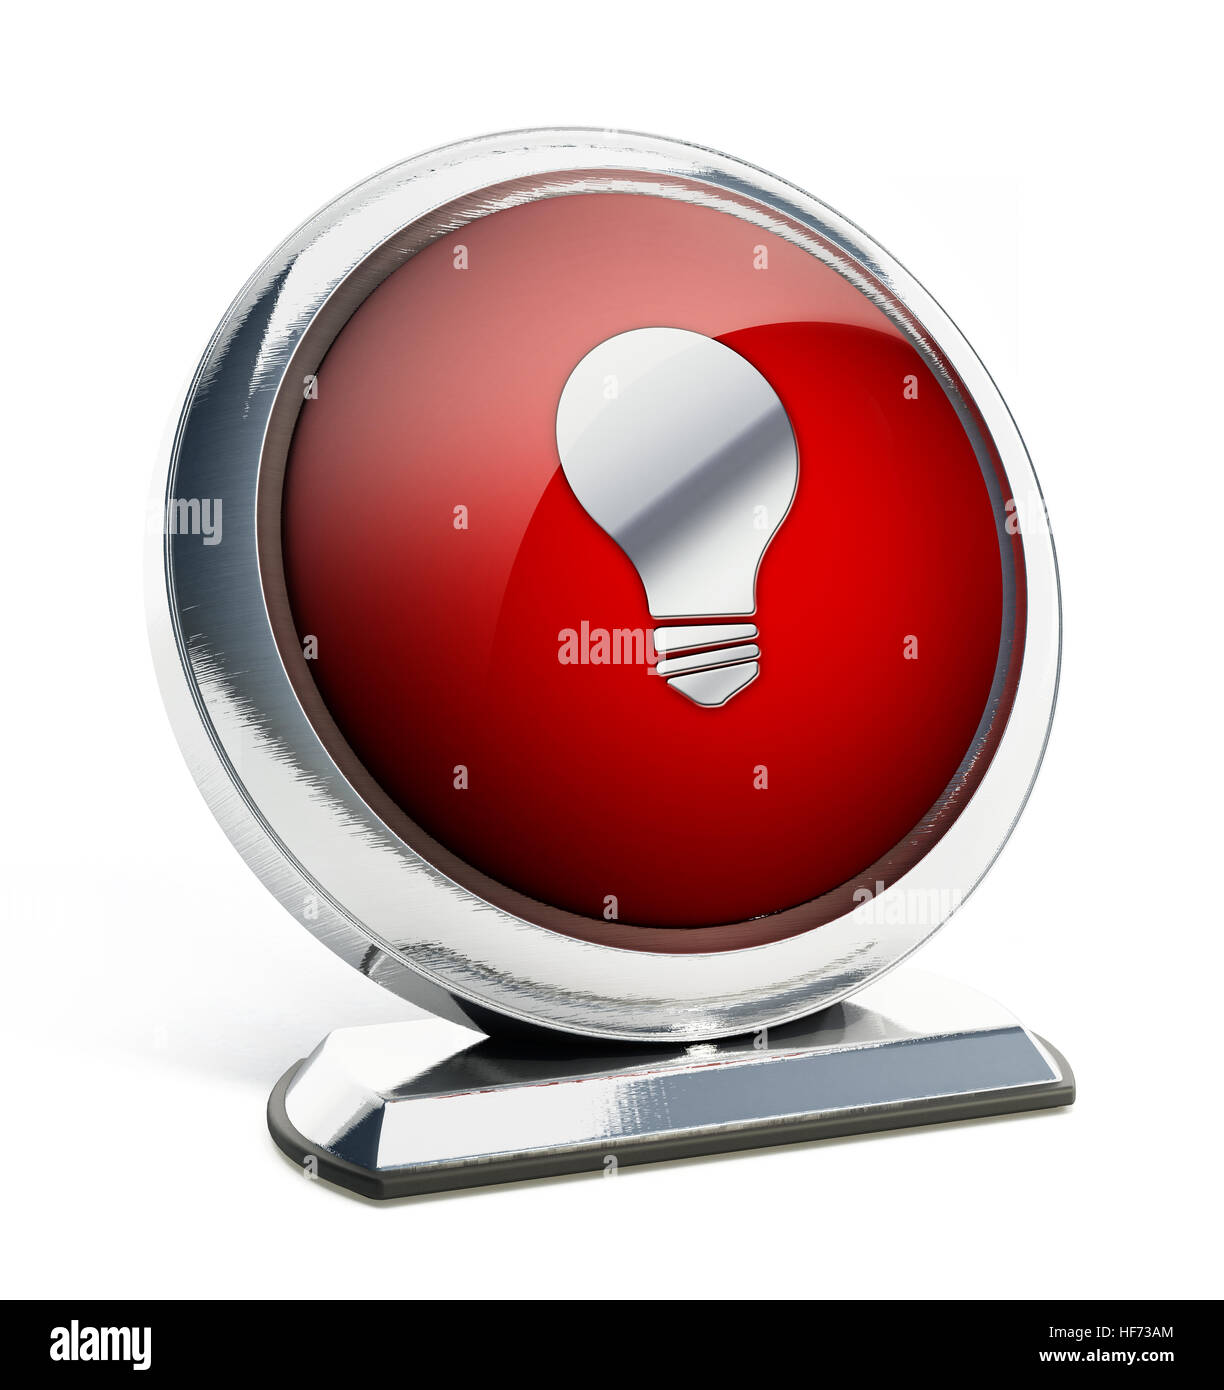 Glossy red button with lightbulb symbol. 3D illustration. Stock Photo